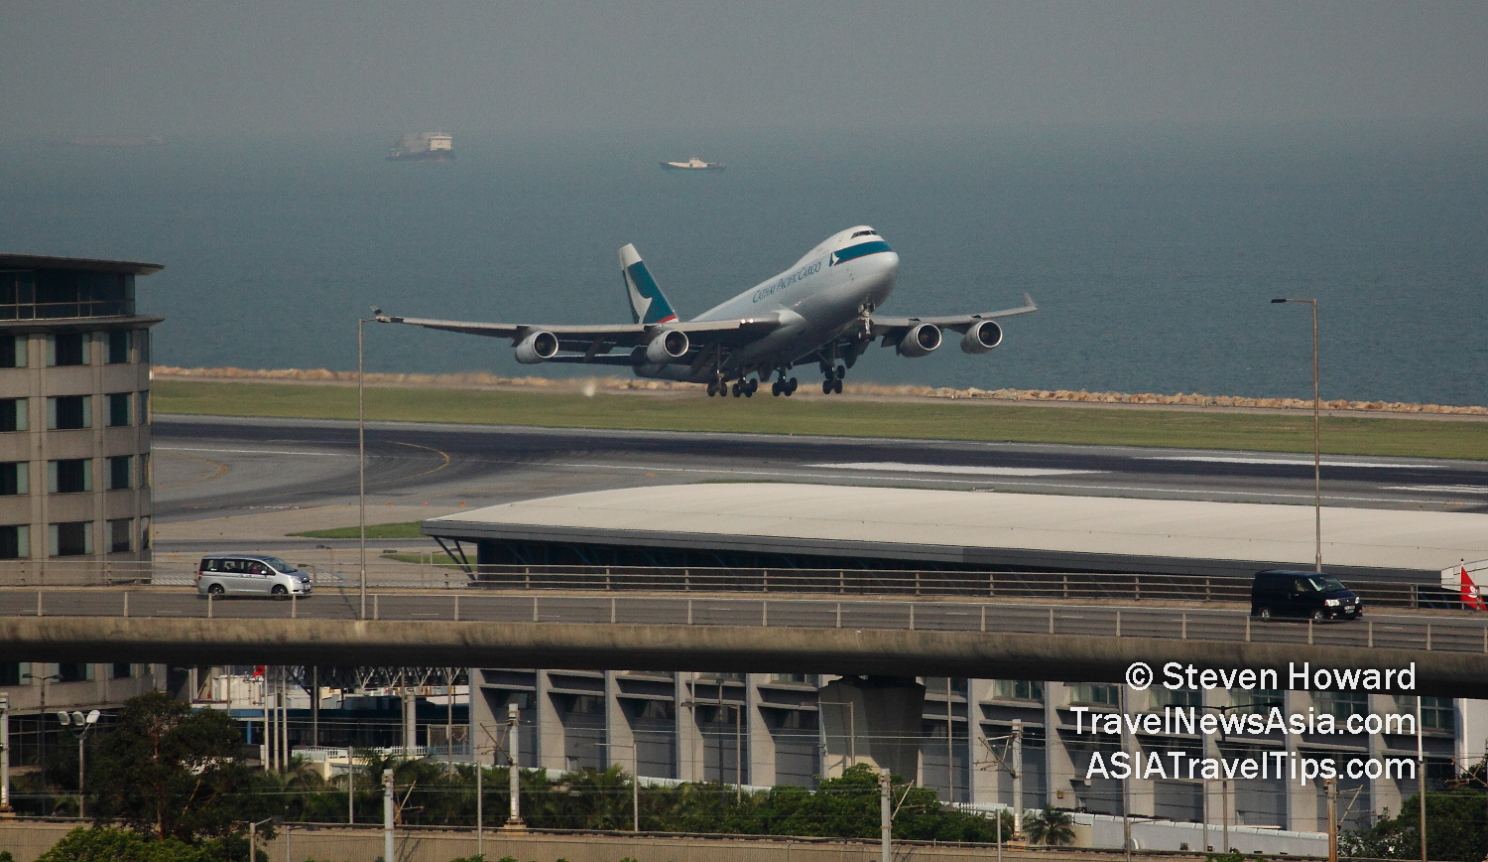 Cathay Pacific Cargo B747F taking off from Hong Kong International Airport (HKIA). Picture by Steven Howard of TravelNewsAsia.com Click to enlarge.